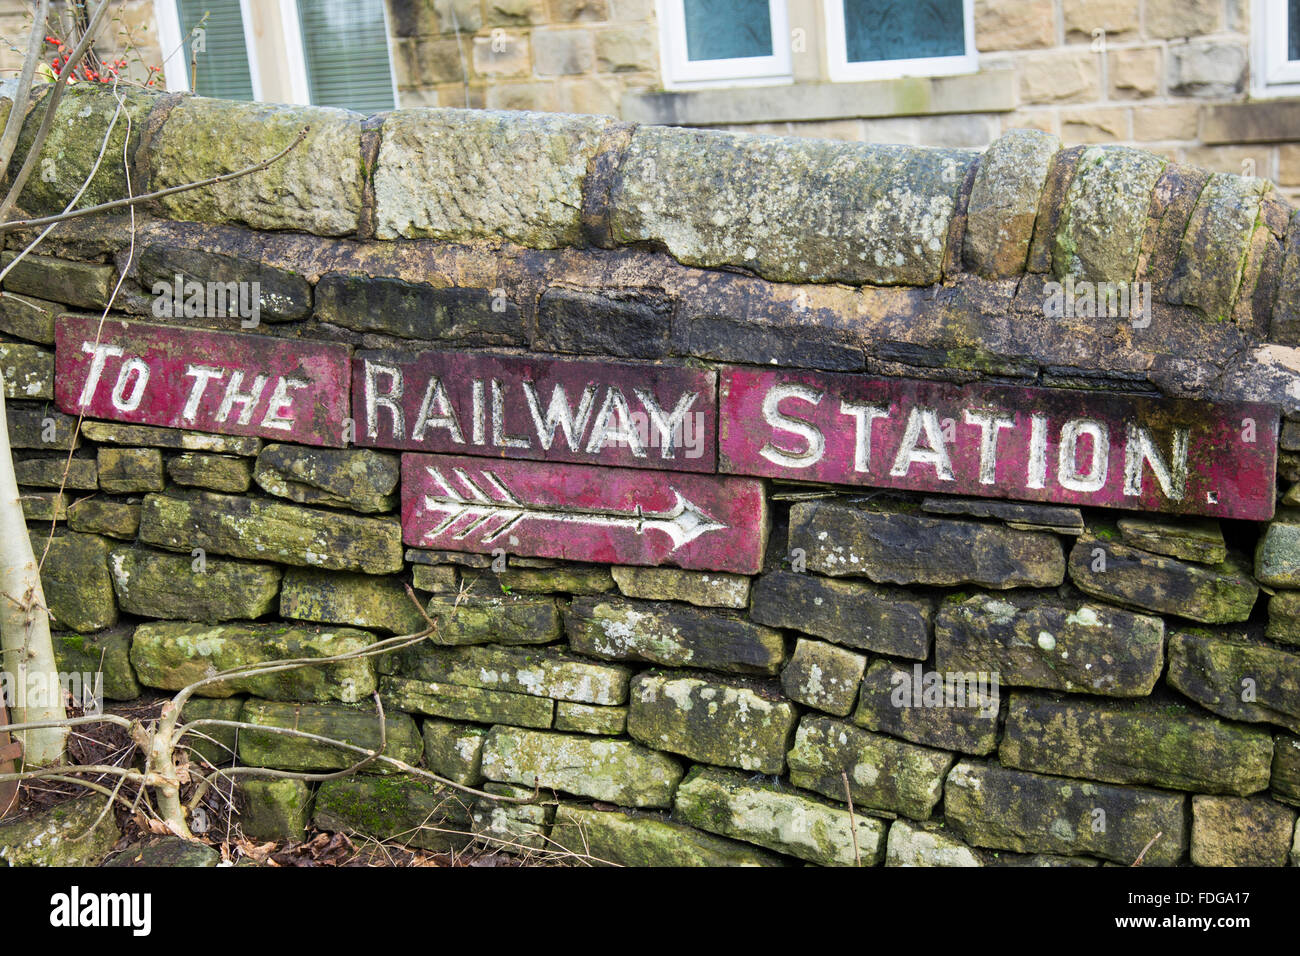 To the railway station sign in the village of Haworth, West Yorkshire, England, UK Stock Photo